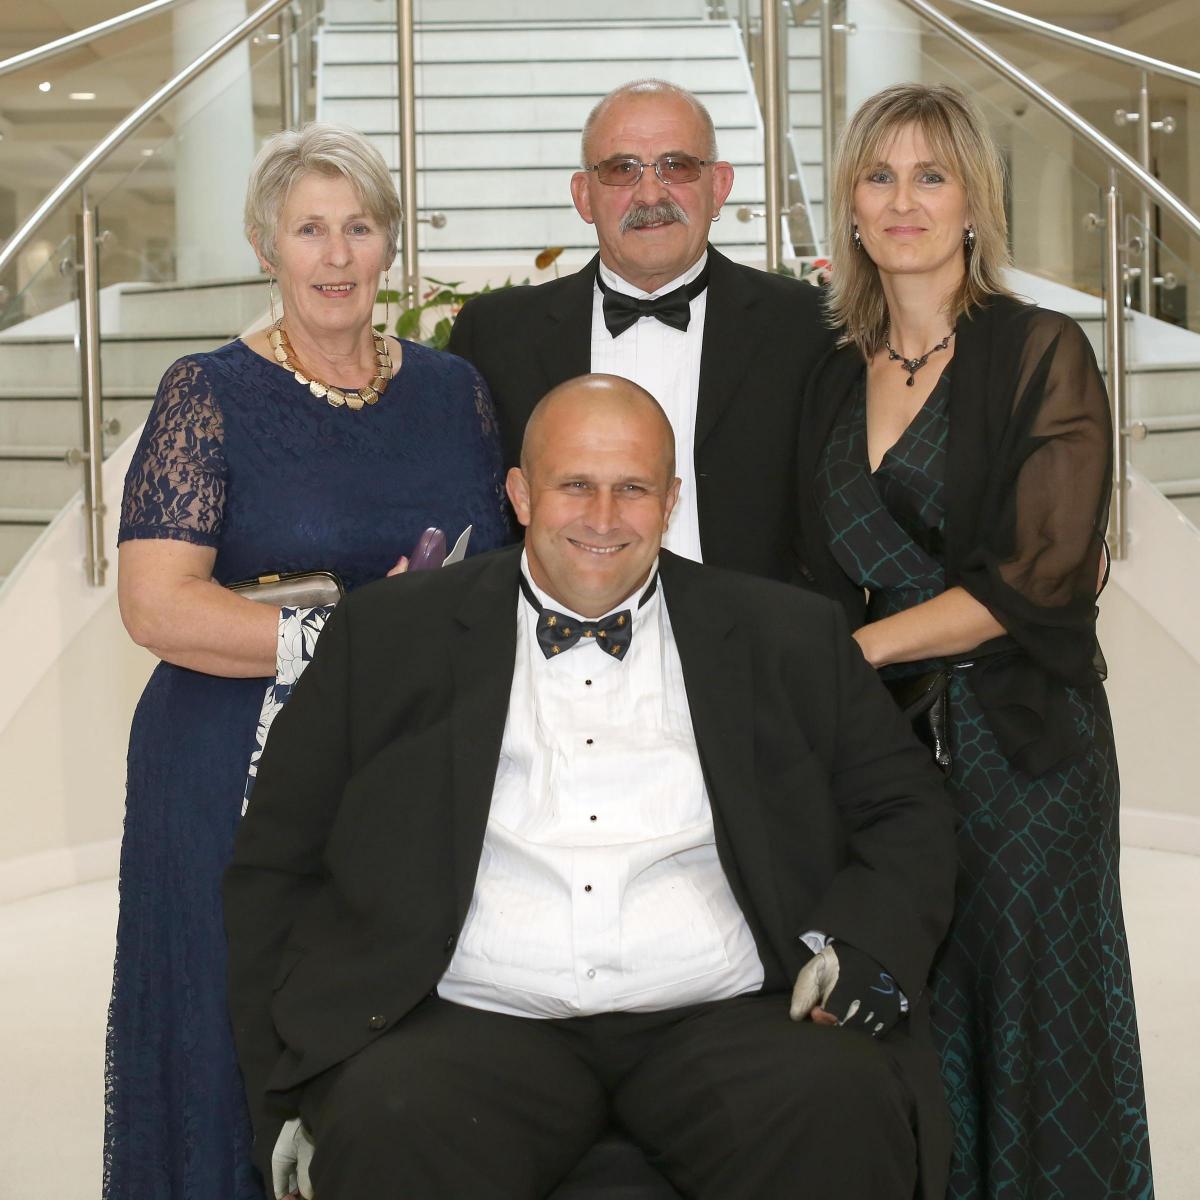 Wensleydale RFC Ball at Tennants, Leyburn.
Val, John, Terry and Karen Metcalfe.
Picture: Richard Doughty Photography